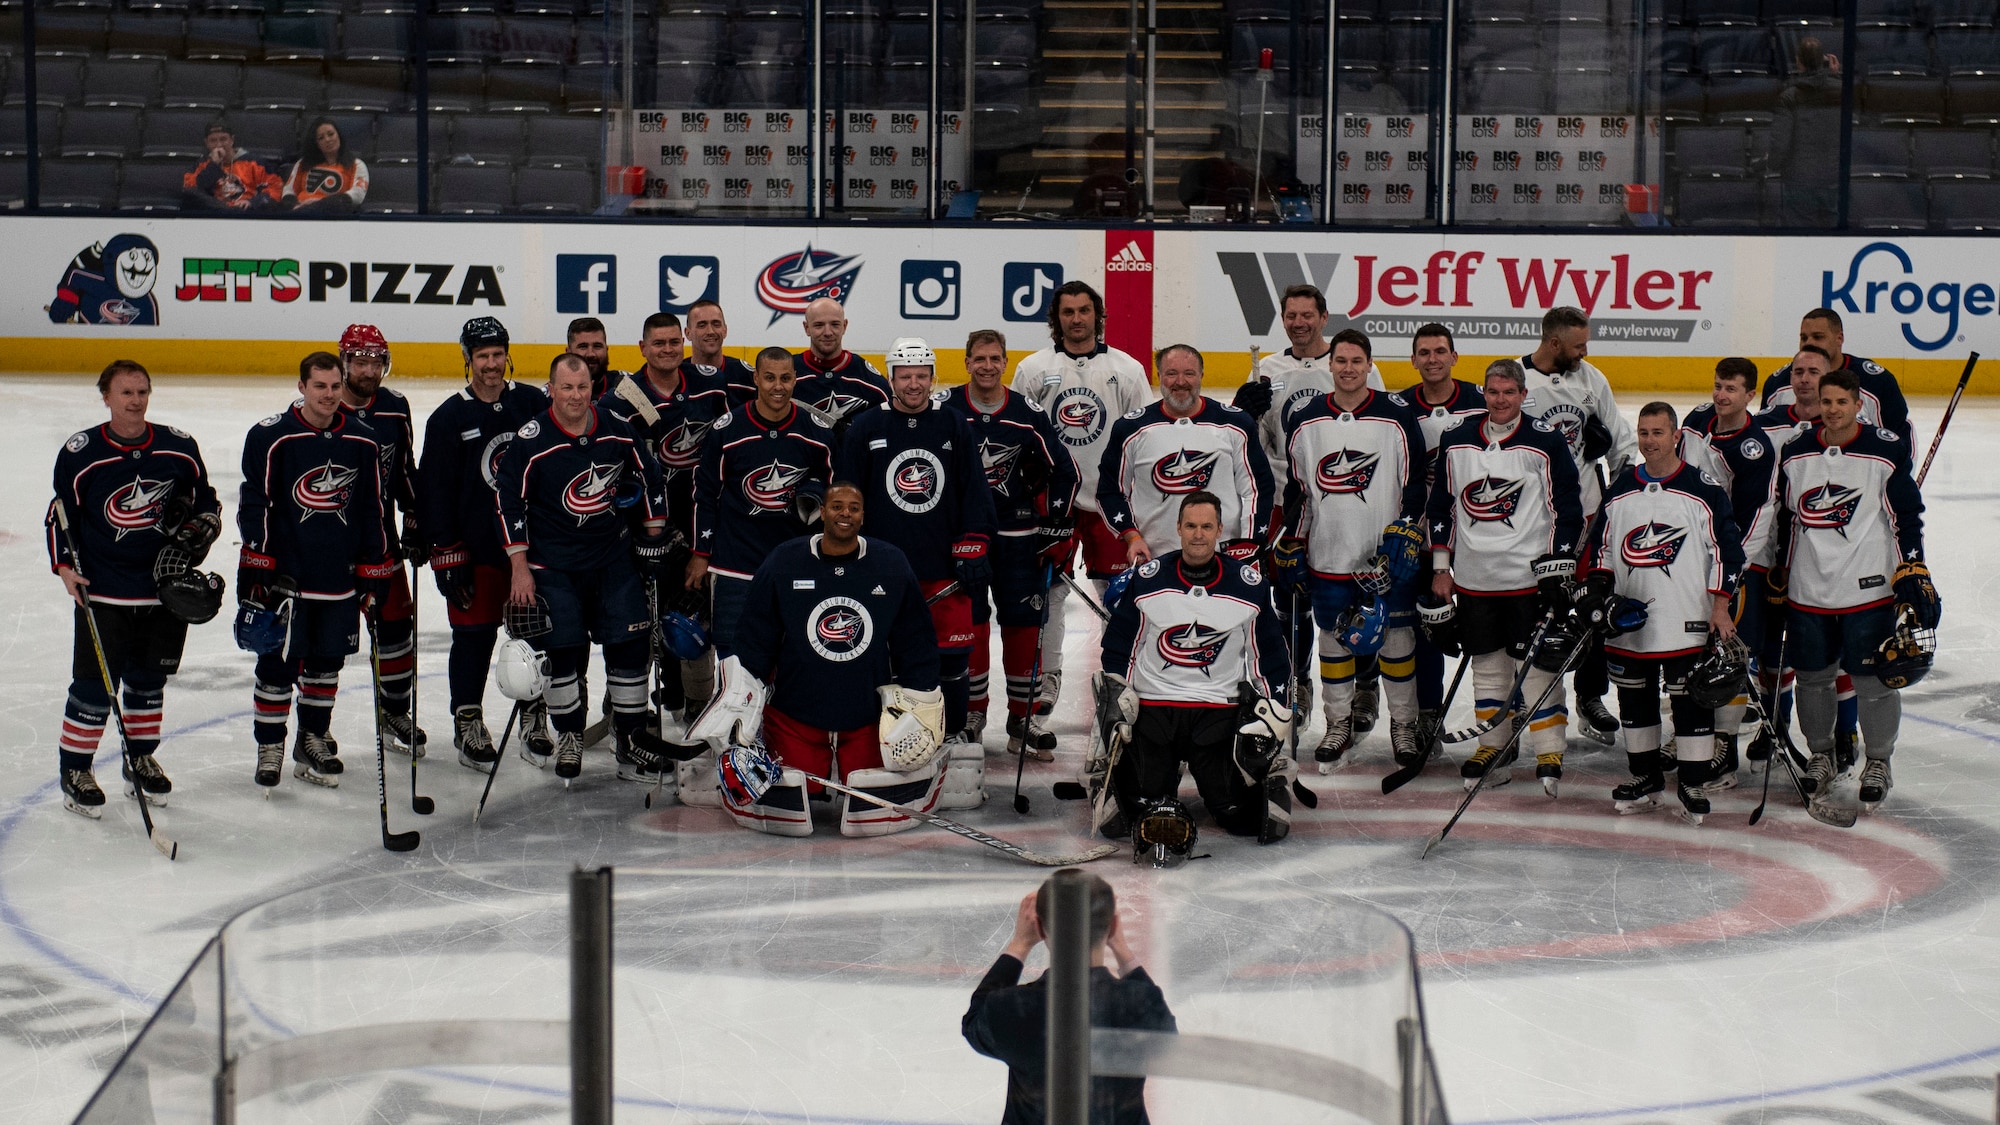 Players who competed in the alumni scrimmage take a group photo April 7, 2022, at Nationwide Arena, Columbus, Ohio. Prior to facing the Philadelphia Flyers, the Columbus Blue Jackets kicked off their annual Military Appreciation Night with a friendly exhibition game featuring former players and the Wright Flyers, a recreation team made up of military and civilian personnel from Wright-Patterson Air Force Base. (U.S. Air Force photo by Senior Airman Jack Gardner)